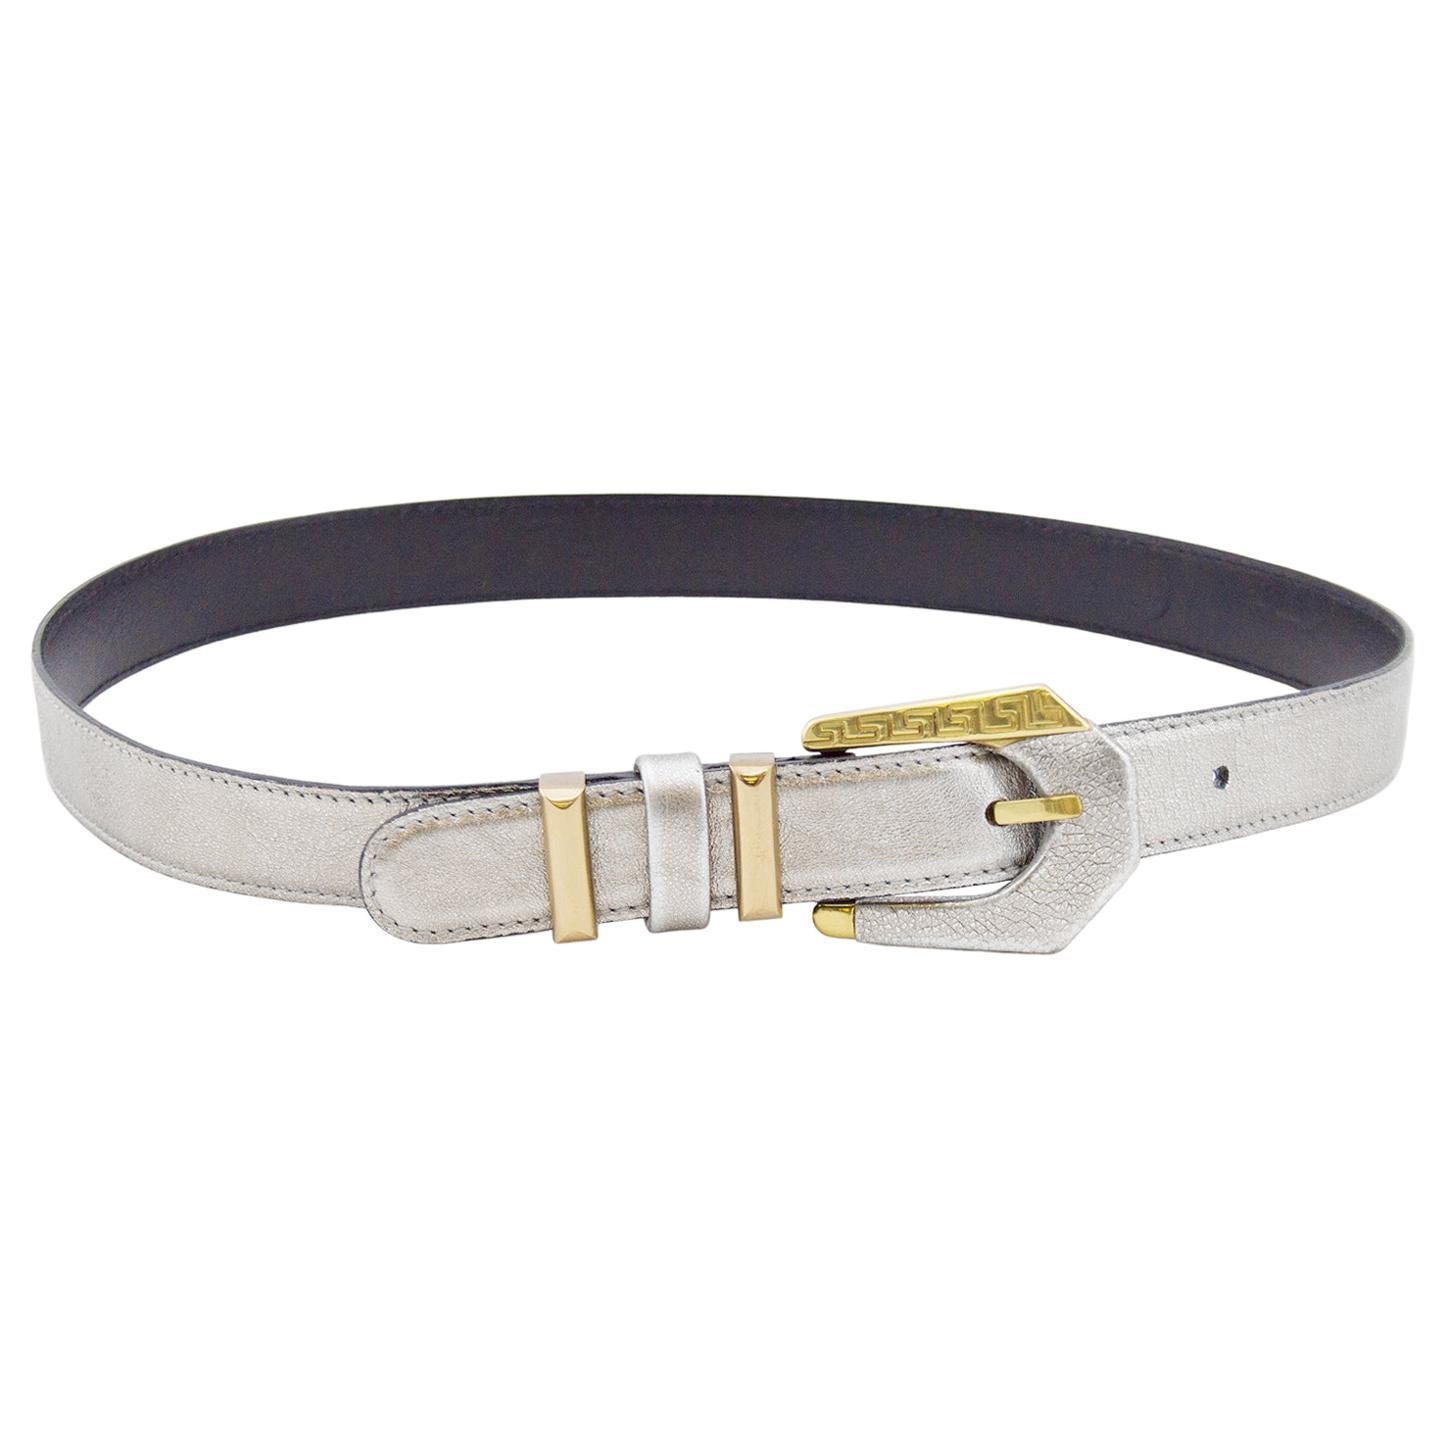 1990s Gianni Versace Silver Leather and Gold Belt